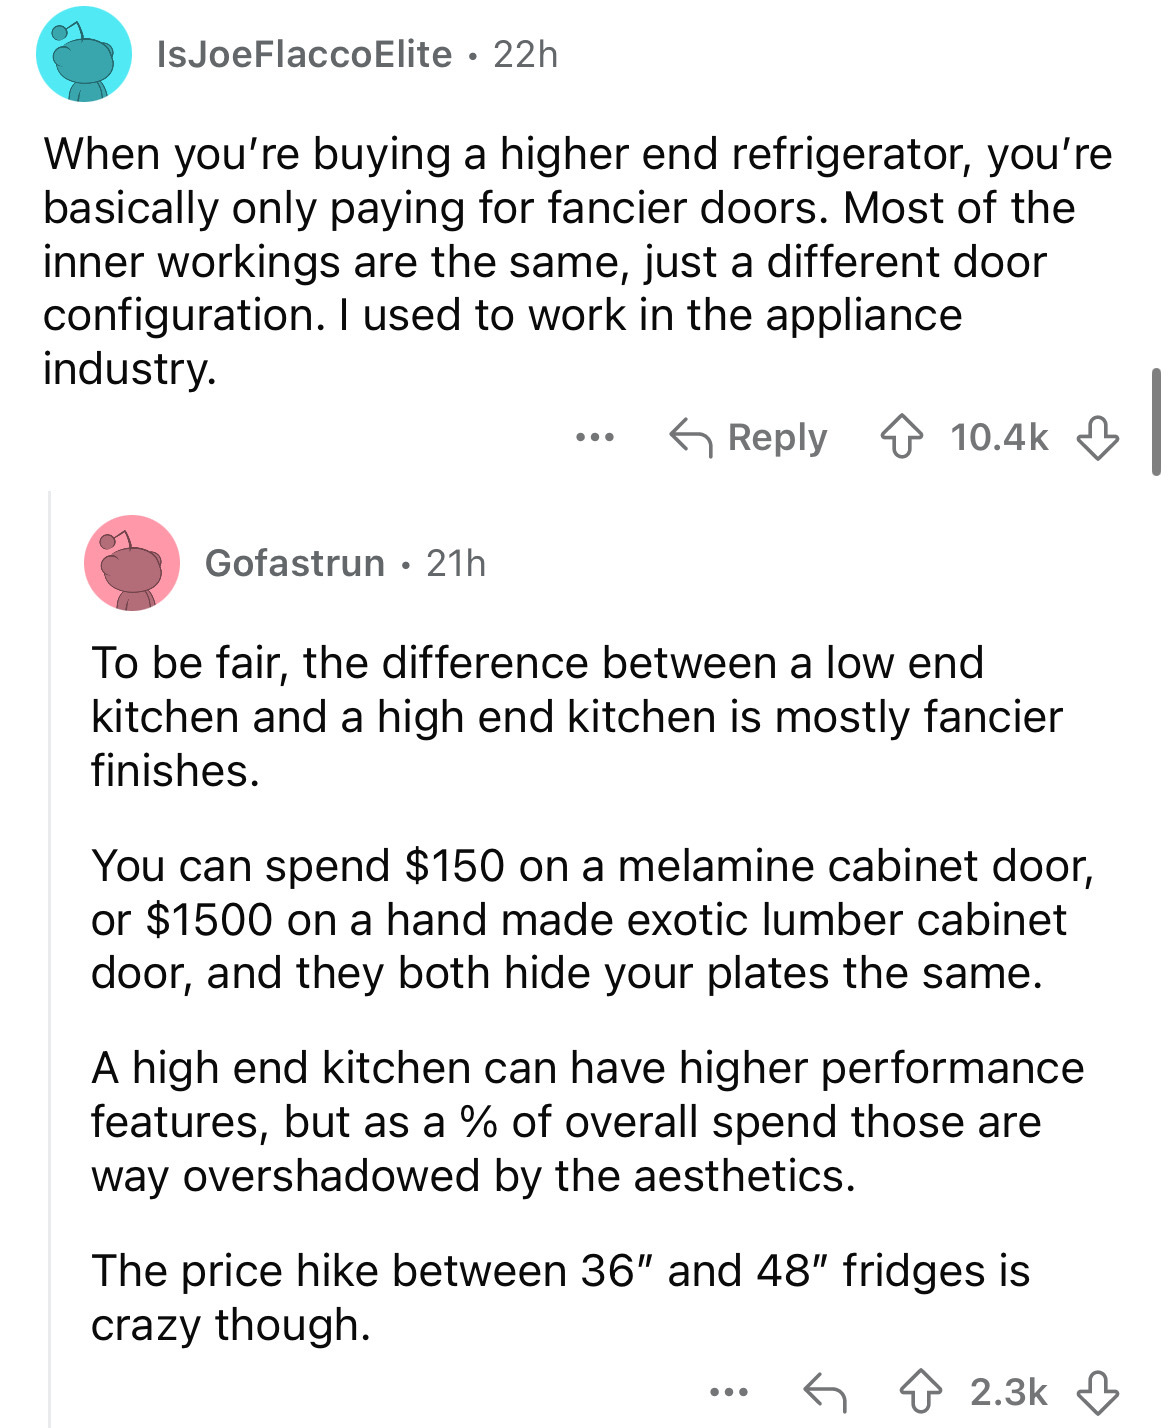 document - Is Joe FlaccoElite 22h When you're buying a higher end refrigerator, you're basically only paying for fancier doors. Most of the inner workings are the same, just a different door configuration. I used to work in the appliance industry. ... Gof